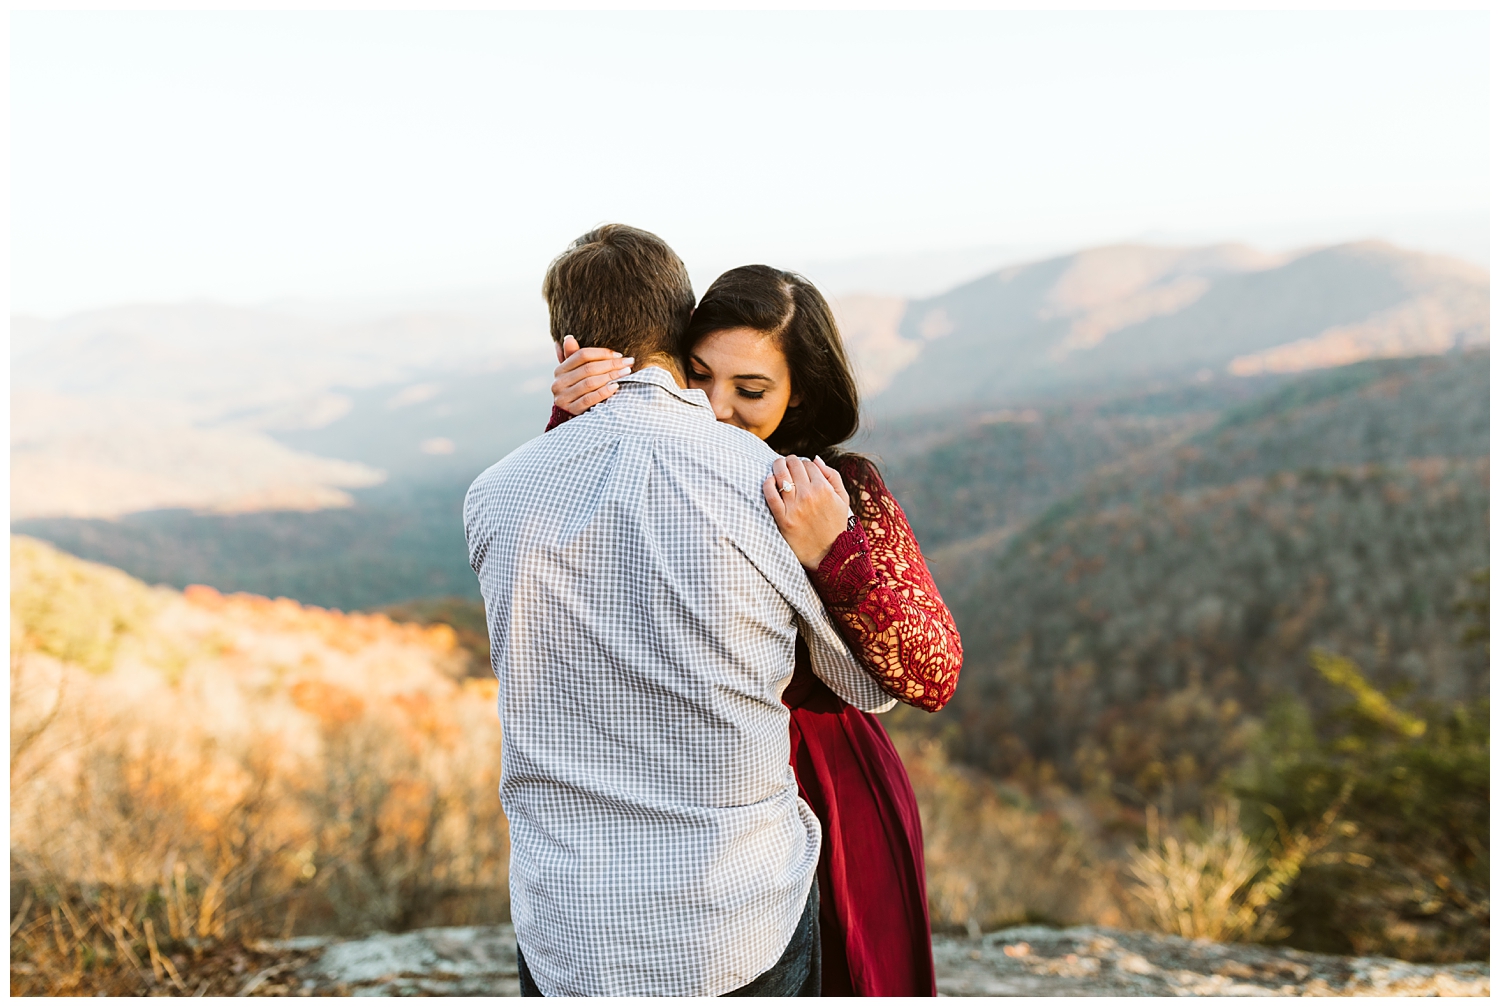 Fall Engagement Session on the Appalachian Trail in the North Georgia Mountains